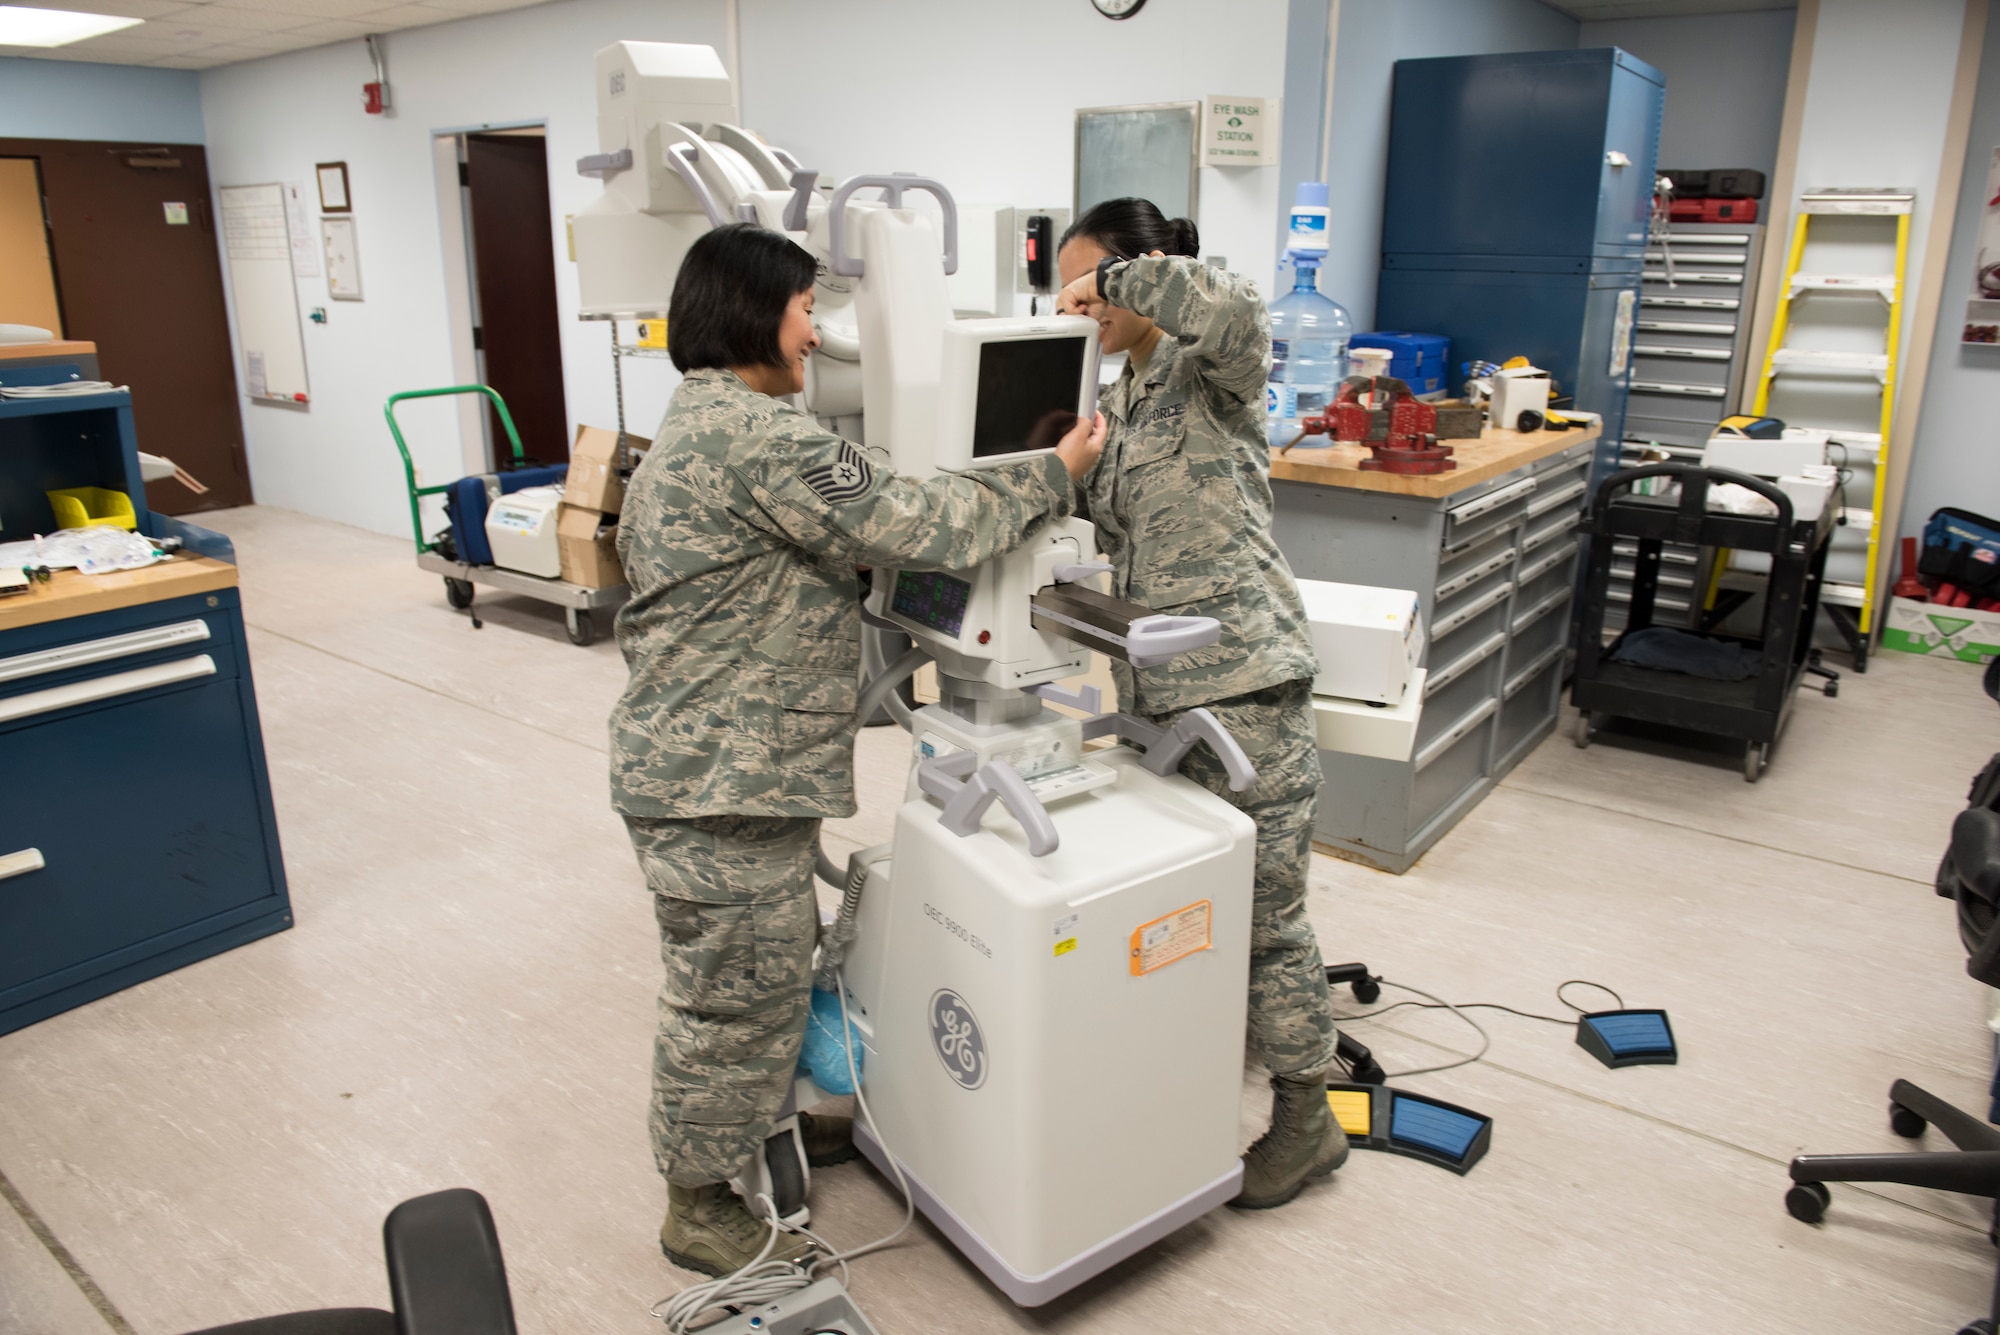 ech. Sgt. Kristine Richardson, 39th Medical Support Squadron biomedical equipment NCO in charge, left, and Senior Airman Kirsten Lee, 39th MDSS biomedical equipment technician, fix an X-ray machine March 29, 2019, at Incirlik Air Base, Turkey.